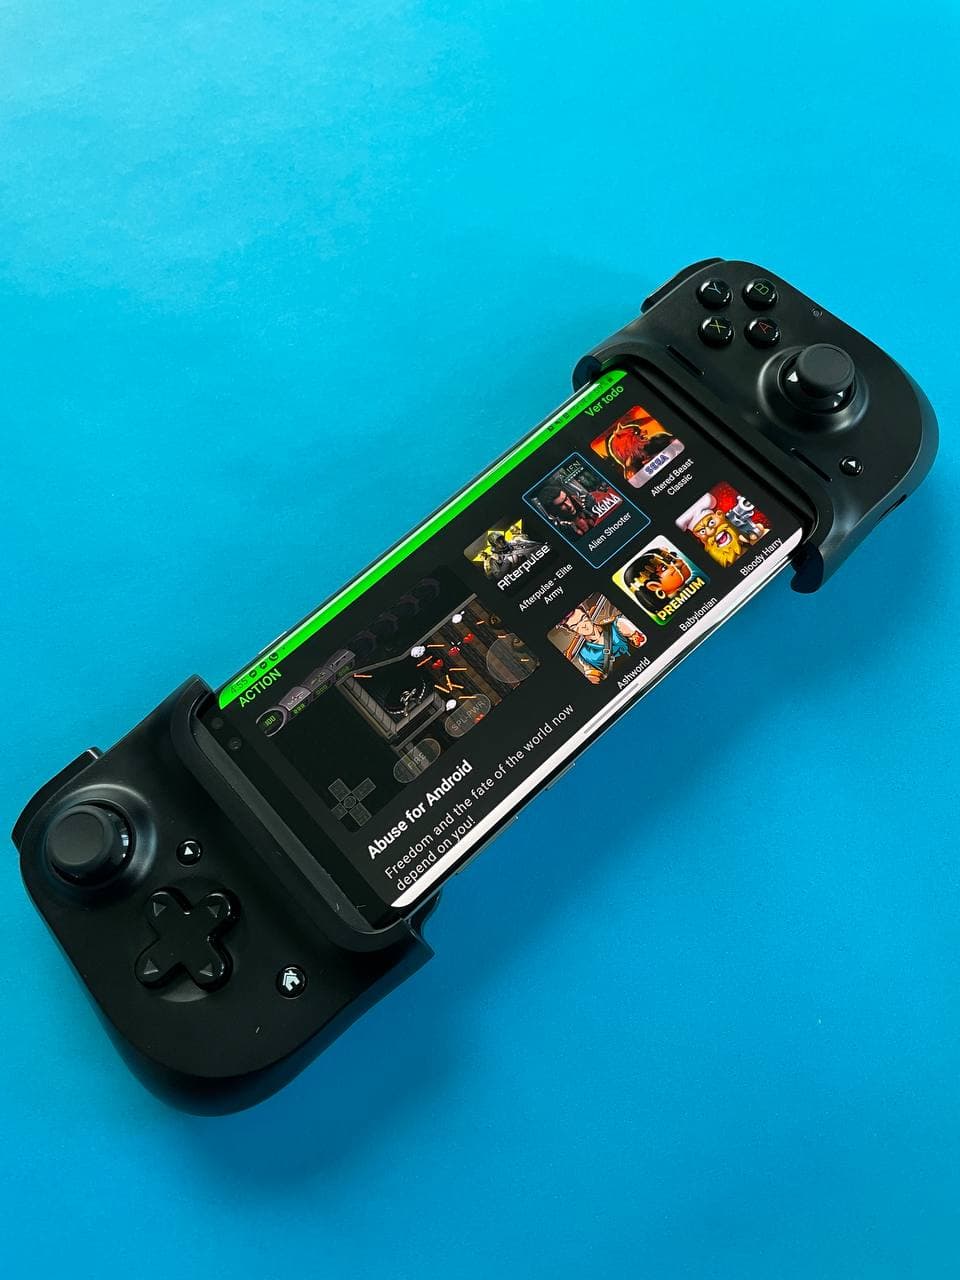 Razer Kishi review: the gadget that turns your phone into a portable console